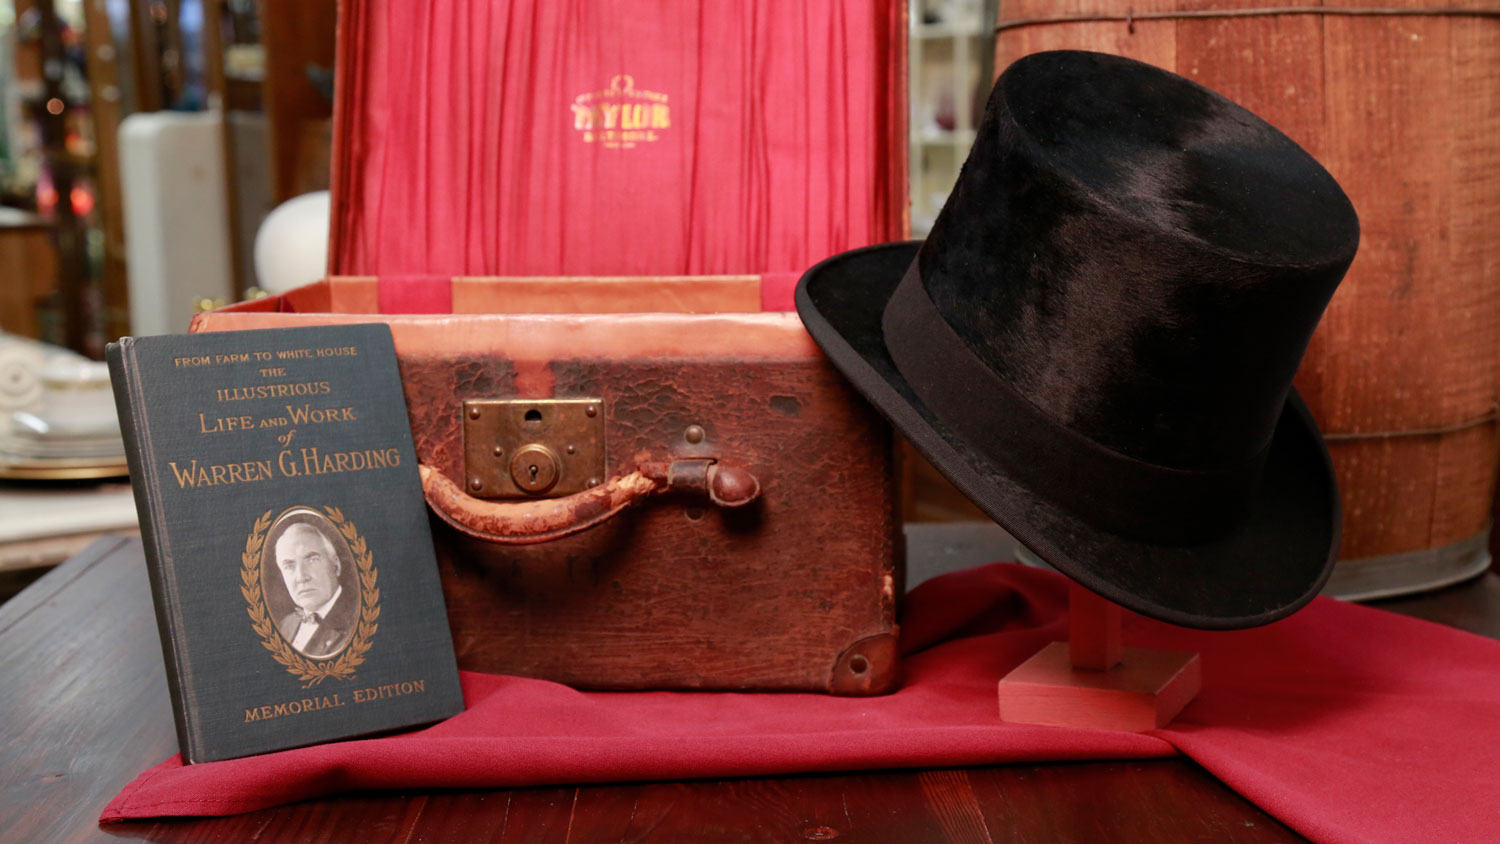  Black beaver top hat and hat box with initials WGH and a book  titled, From Farm to White House.  The Illustrious Life and Work of Warren G. Harding are shown. 